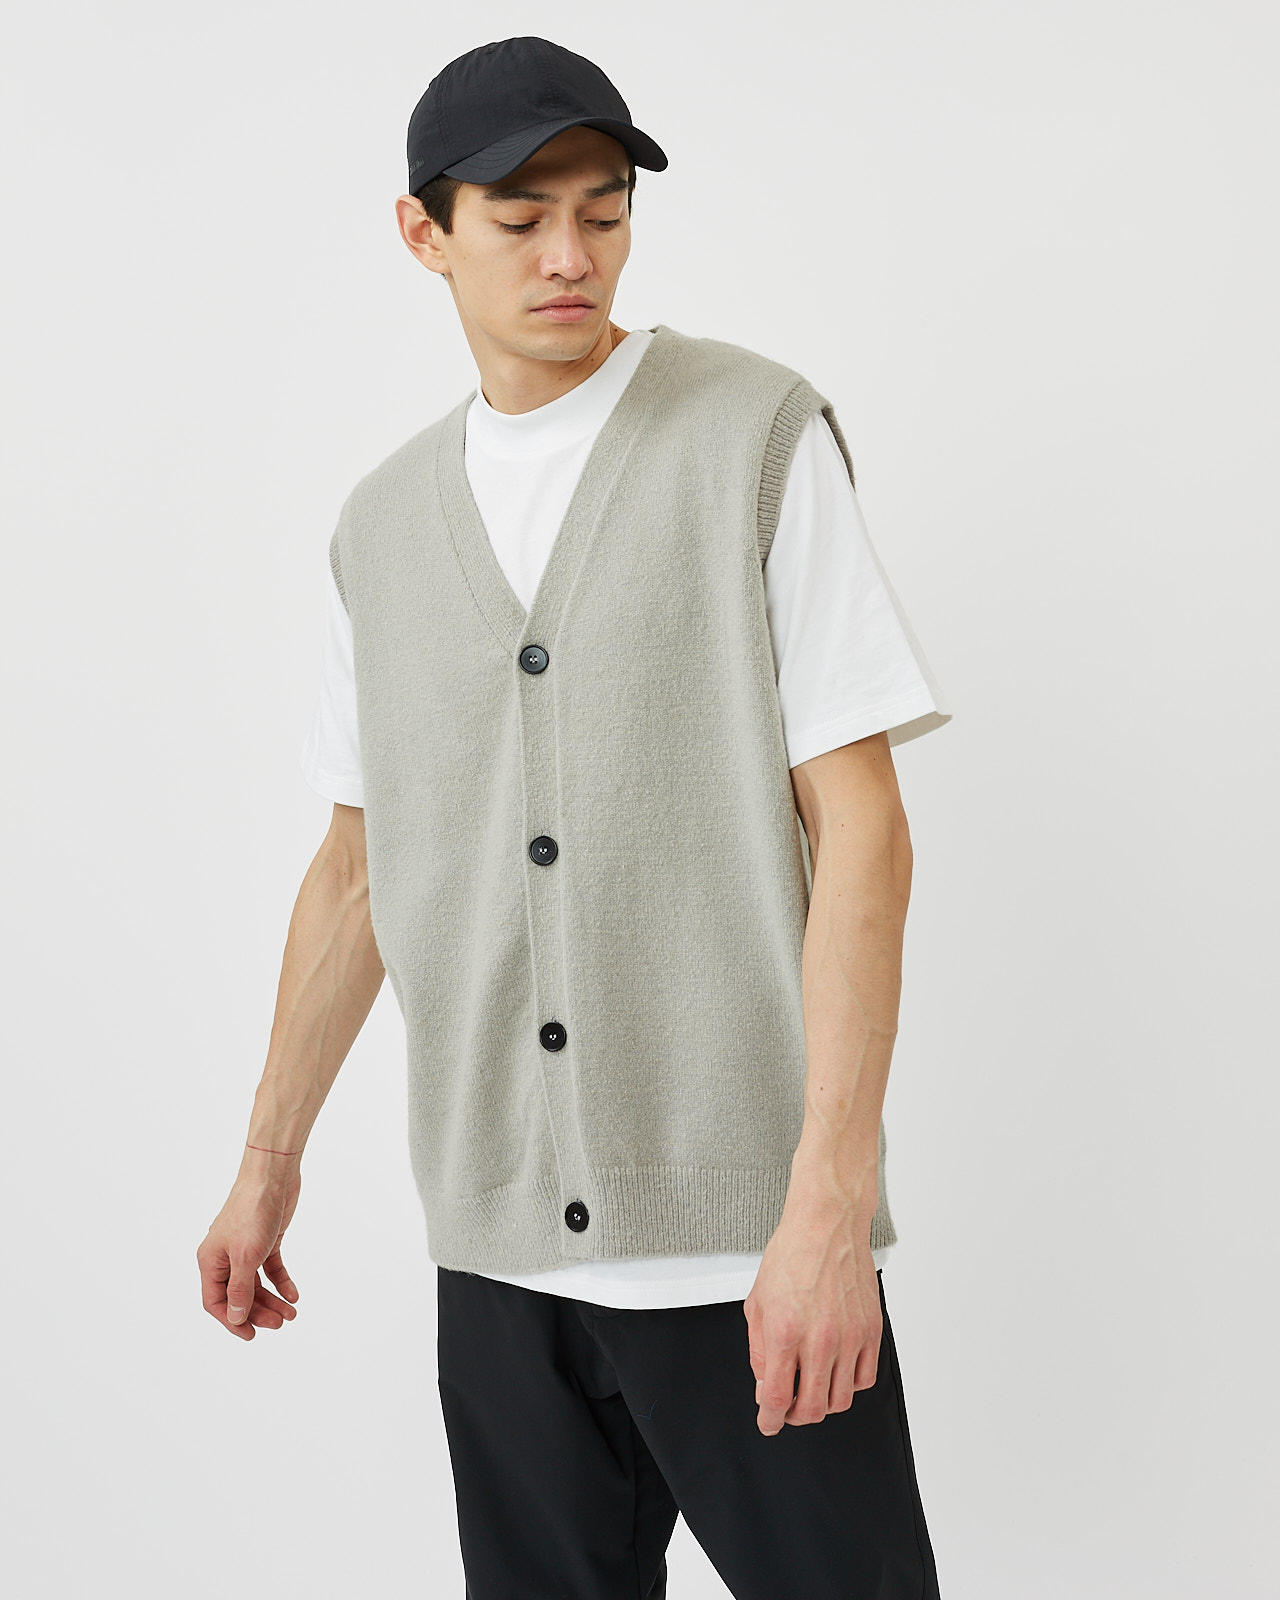 Minimum Men's Vastar Vest in Ghost Grey layered over a white t shirt pairing with a black cap